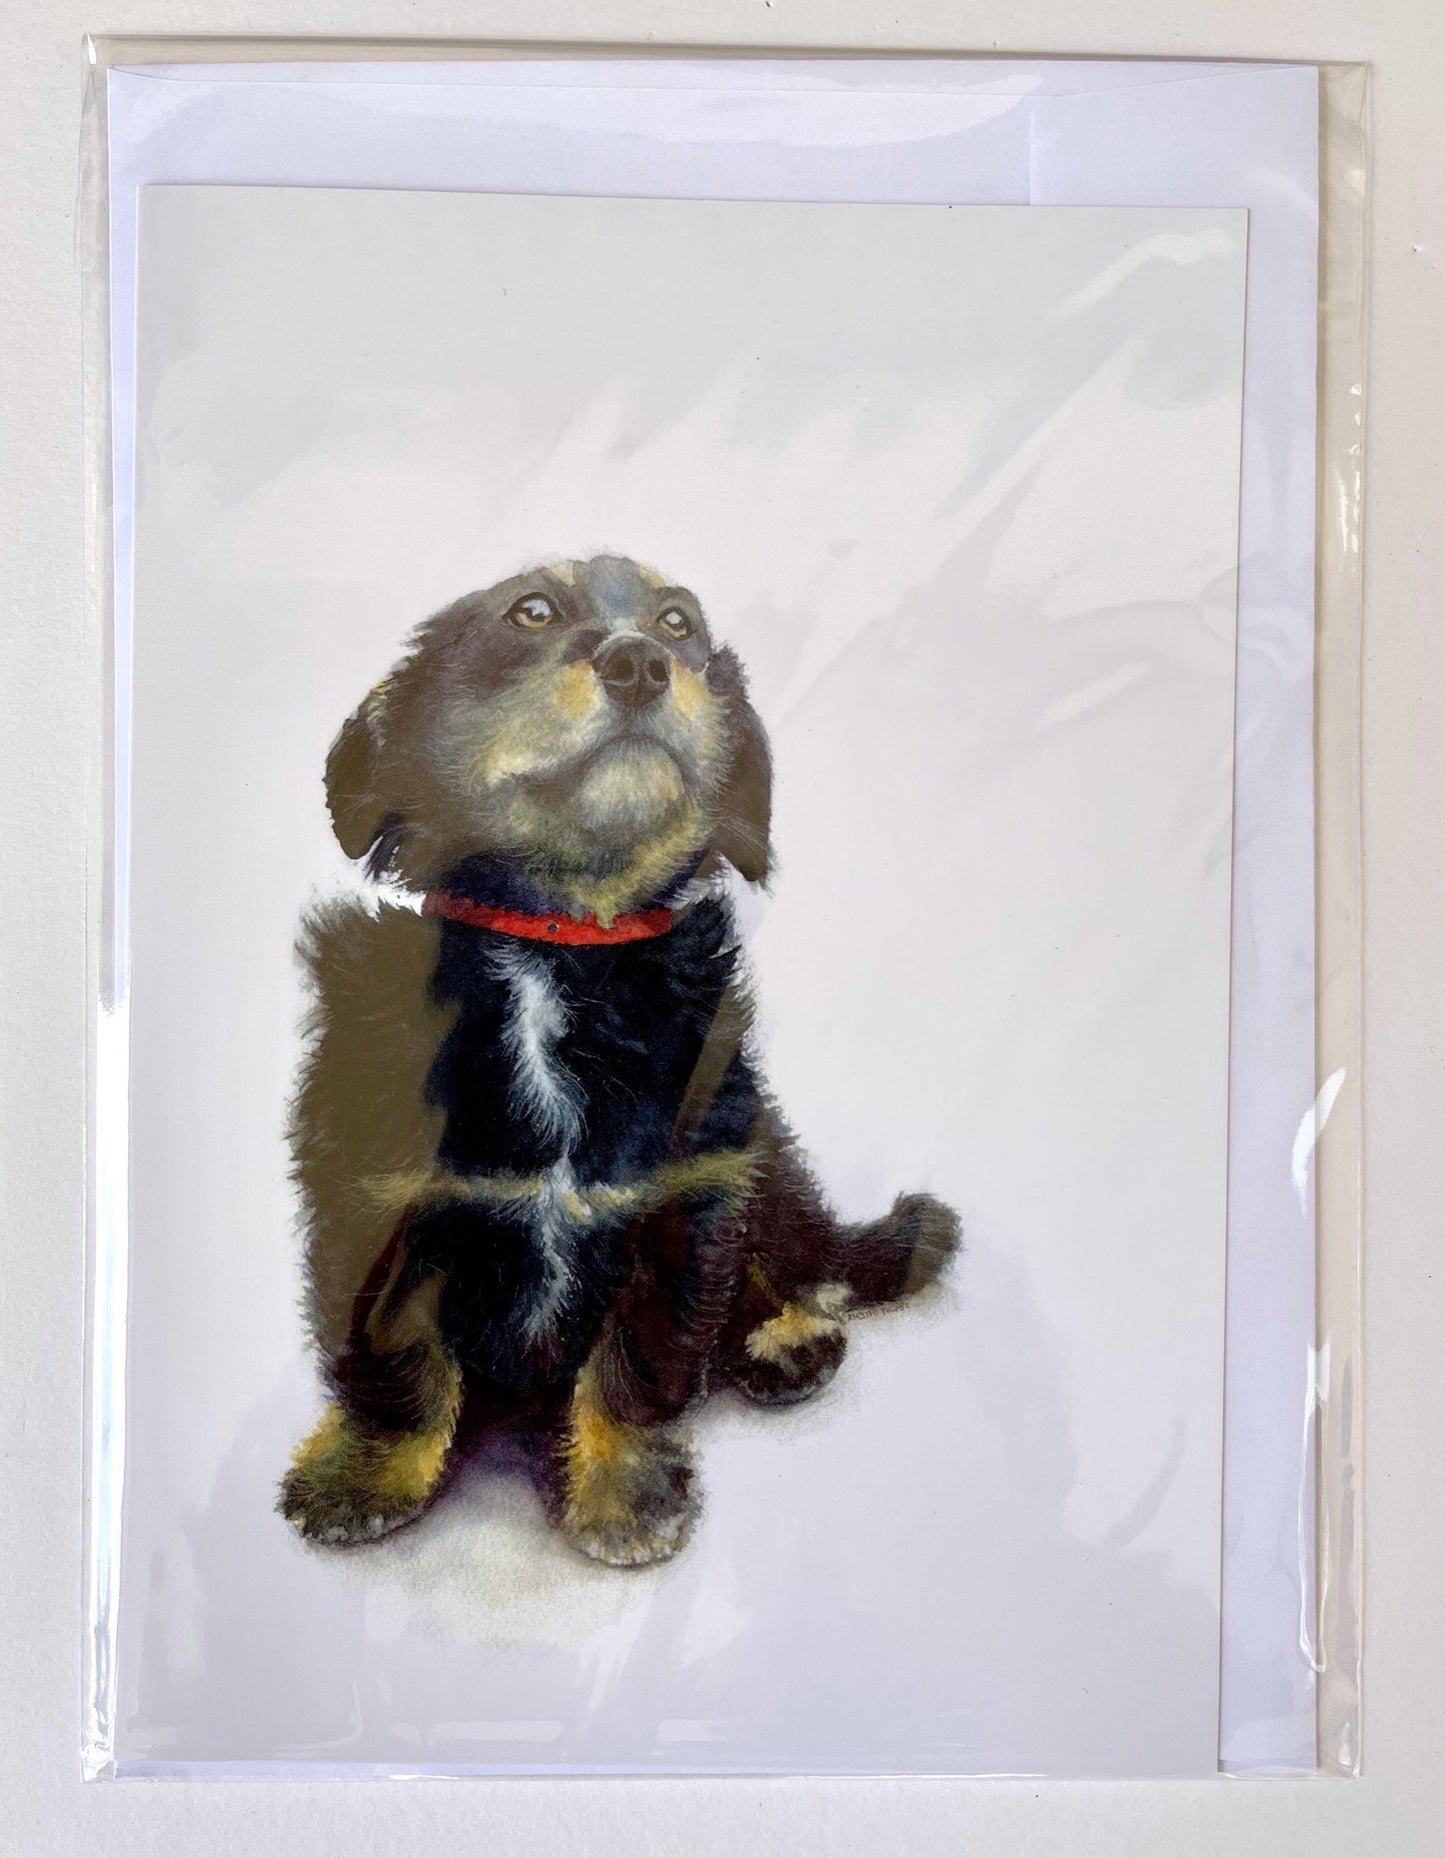 Puppy with Red Collar, A5 Greeting Card. Blank inside.